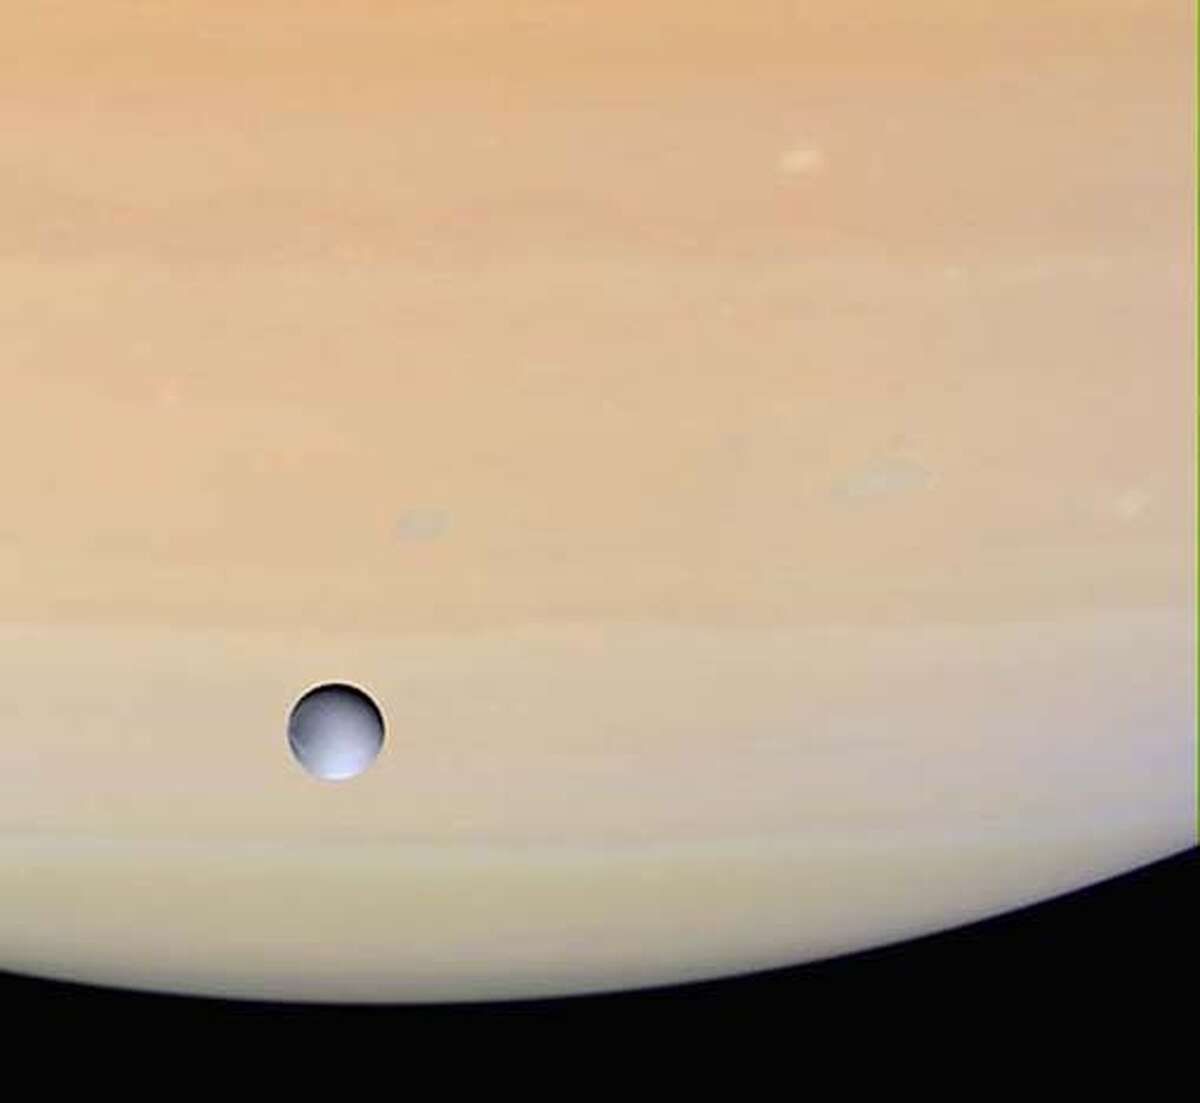 In this image released by NASA on Thursday, Dec. 16, 2004, Saturn's moon Dione is shown against the globe of Saturn as Cassini approached the icy moon for its close rendezvous on Dec. 14, 2004. The images used to create this view were obtained with the Cassini spacecraft wide-angle camera at a distance of approximately 603,000 kilometers (375,000 miles) from Dione. (AP Photo/NASA/JPL/Space Science Institute) Ran on: 12-24-2004 Dione, another moon of Saturn, is shown with the solar system's sixth planet in the background. Ran on: 12-24-2004 Dione, another moon of Saturn, is shown with the solar system's sixth planet in the background. Ran on: 12-24-2004 Dione, another moon of Saturn, is shown with the solar system's sixth planet in the background. PHOTO PROVIDED BY NASA/JPL/SPACE SCIENCE INSTITUTE.